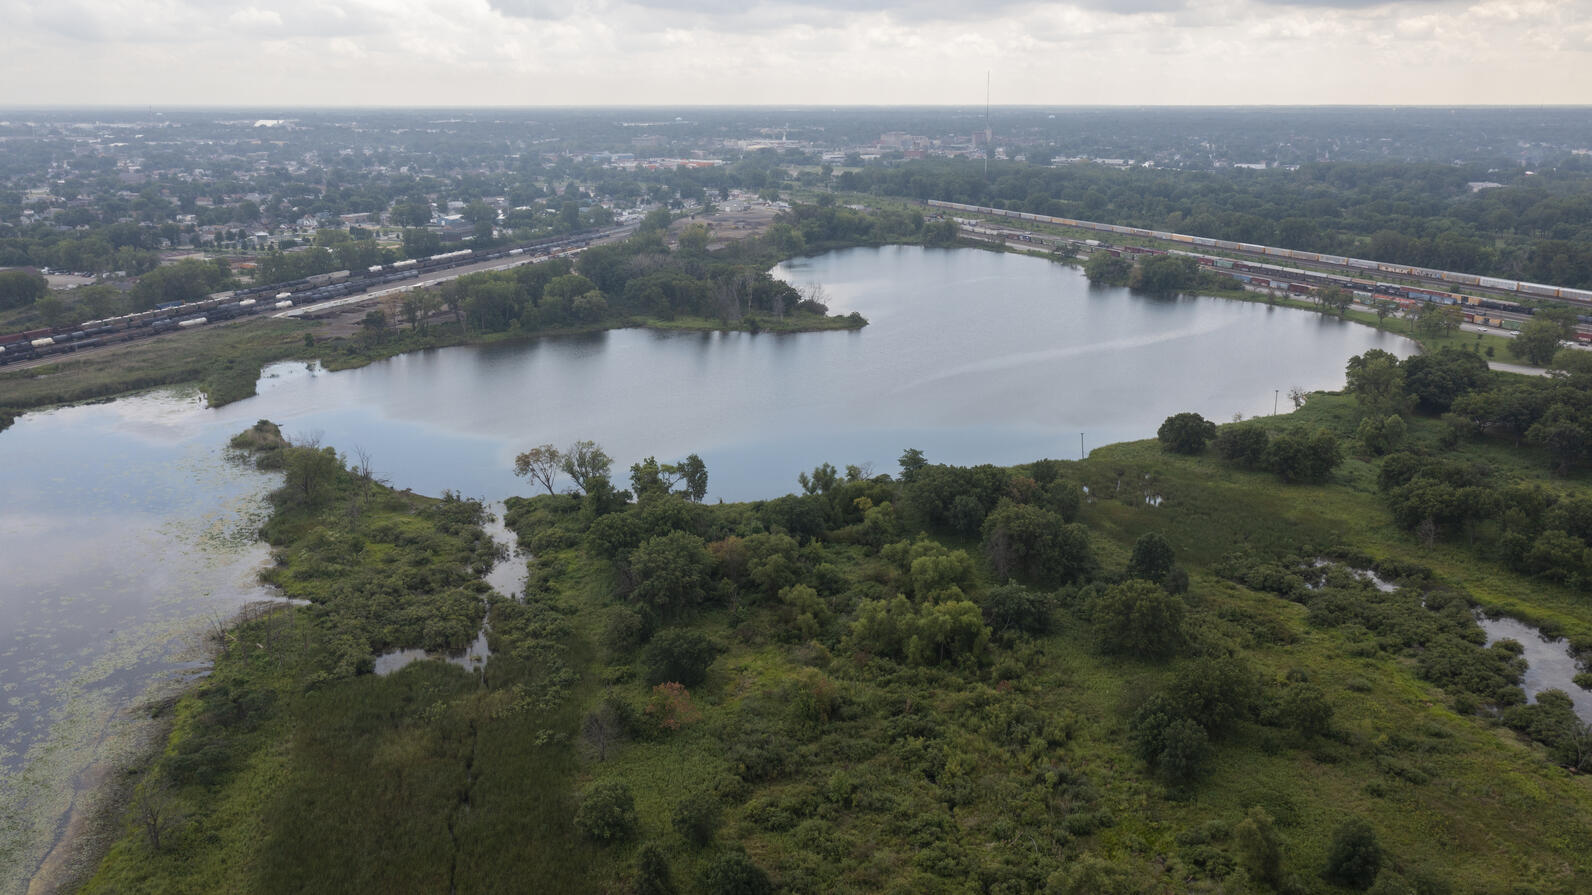 With over $1 million in GLRI support, Audubon Great Lakes, the Forest Preserve District of Cook County, Great Lakes Commission, and National Oceanic and Atmospheric Administration (NOAA) are working to bring back the important balance of water and plant l